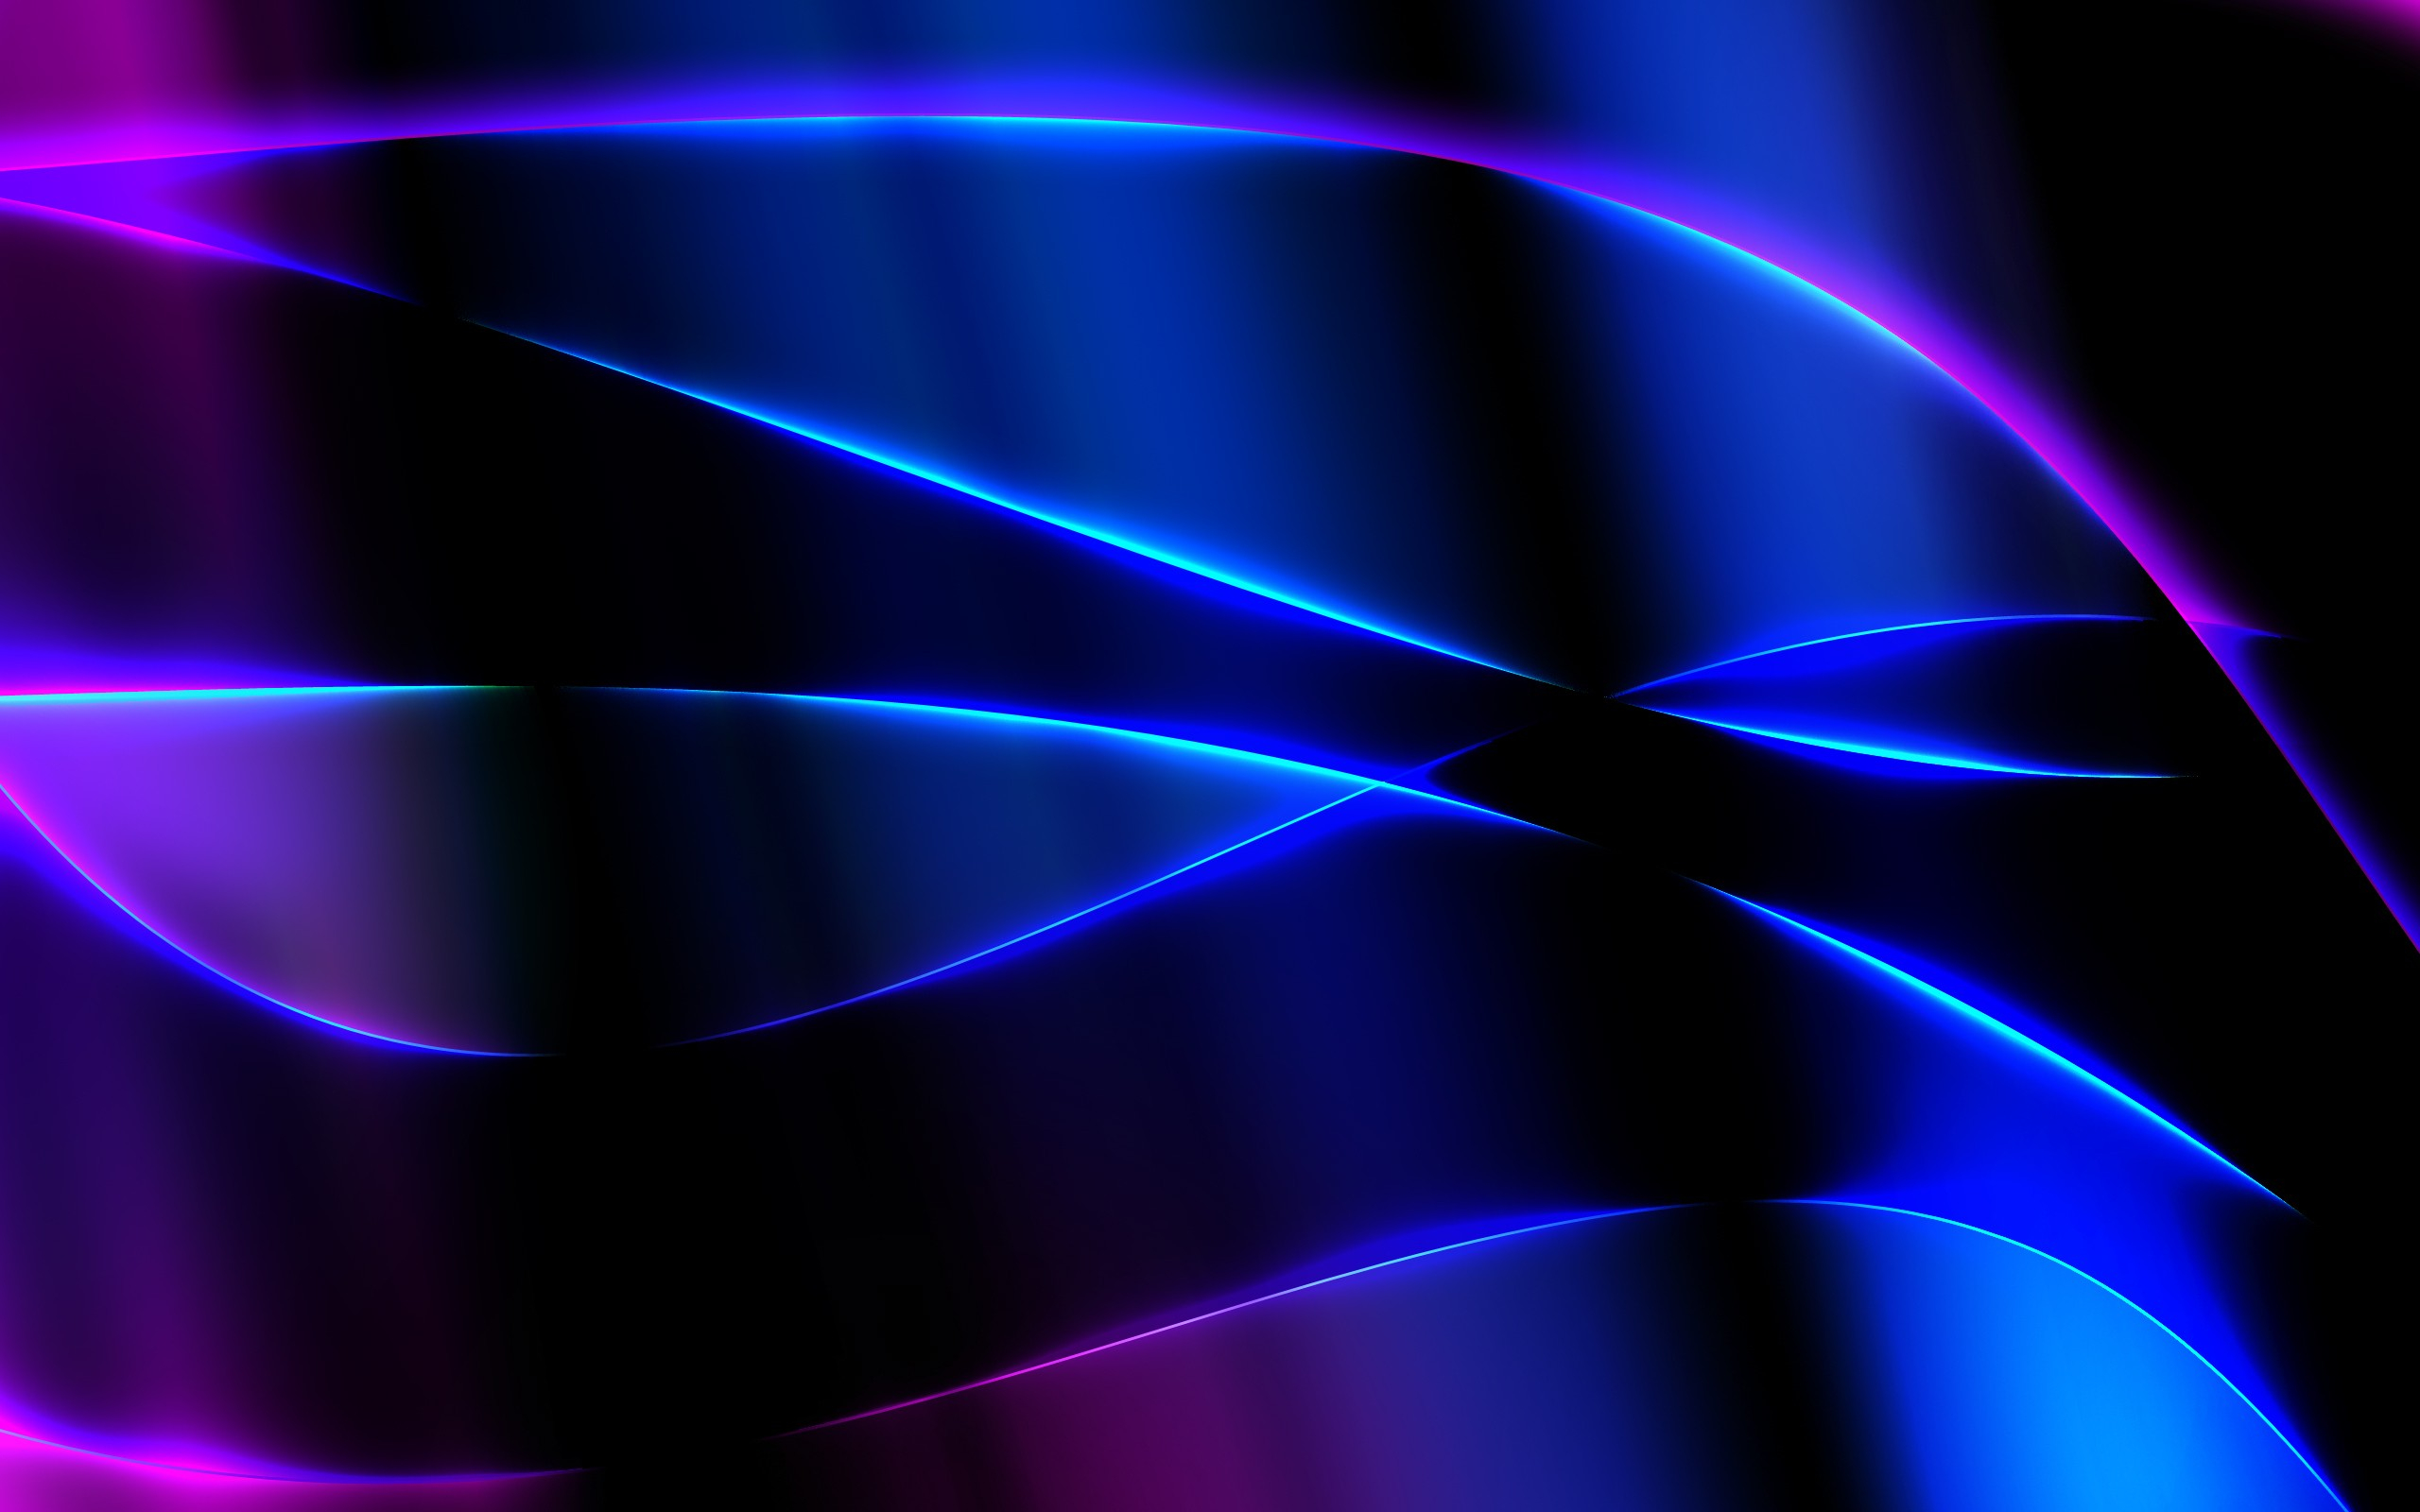 2560x1600 Wallpaper : neon, abstract, purple, wavy lines, blue, circle, lens flare, light, color, wave, shape, line, computer wallpaper, font ludendorf 19496 HD Wallpapers